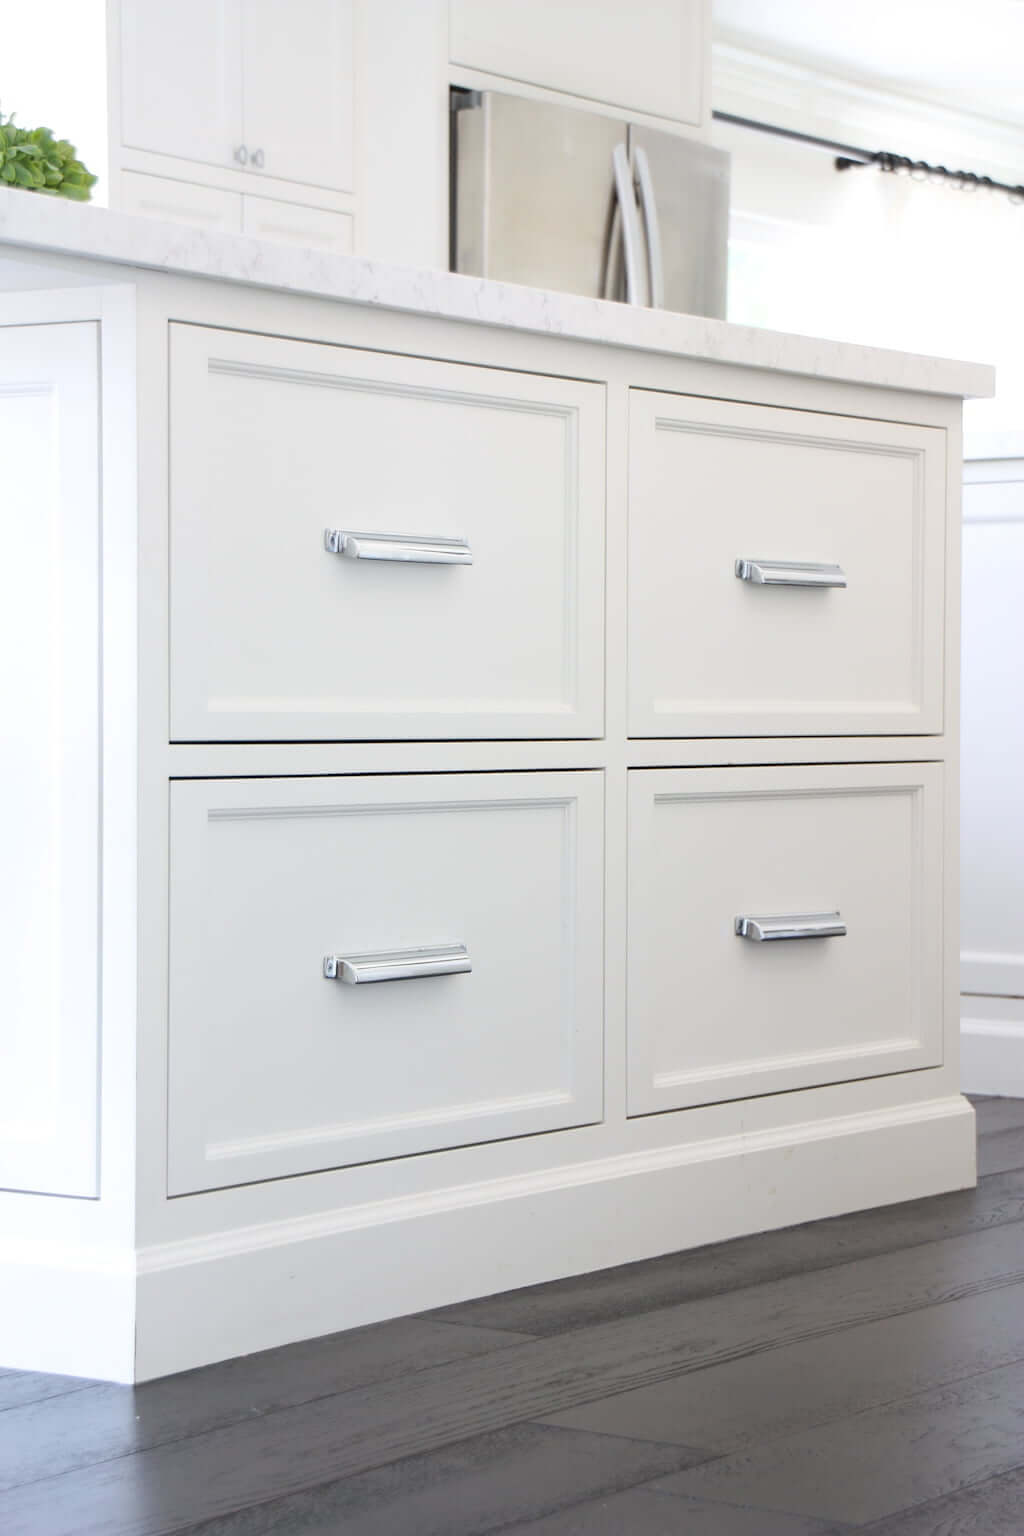 white kitchen island drawers, extra deep drawers with chrome drawer pulls